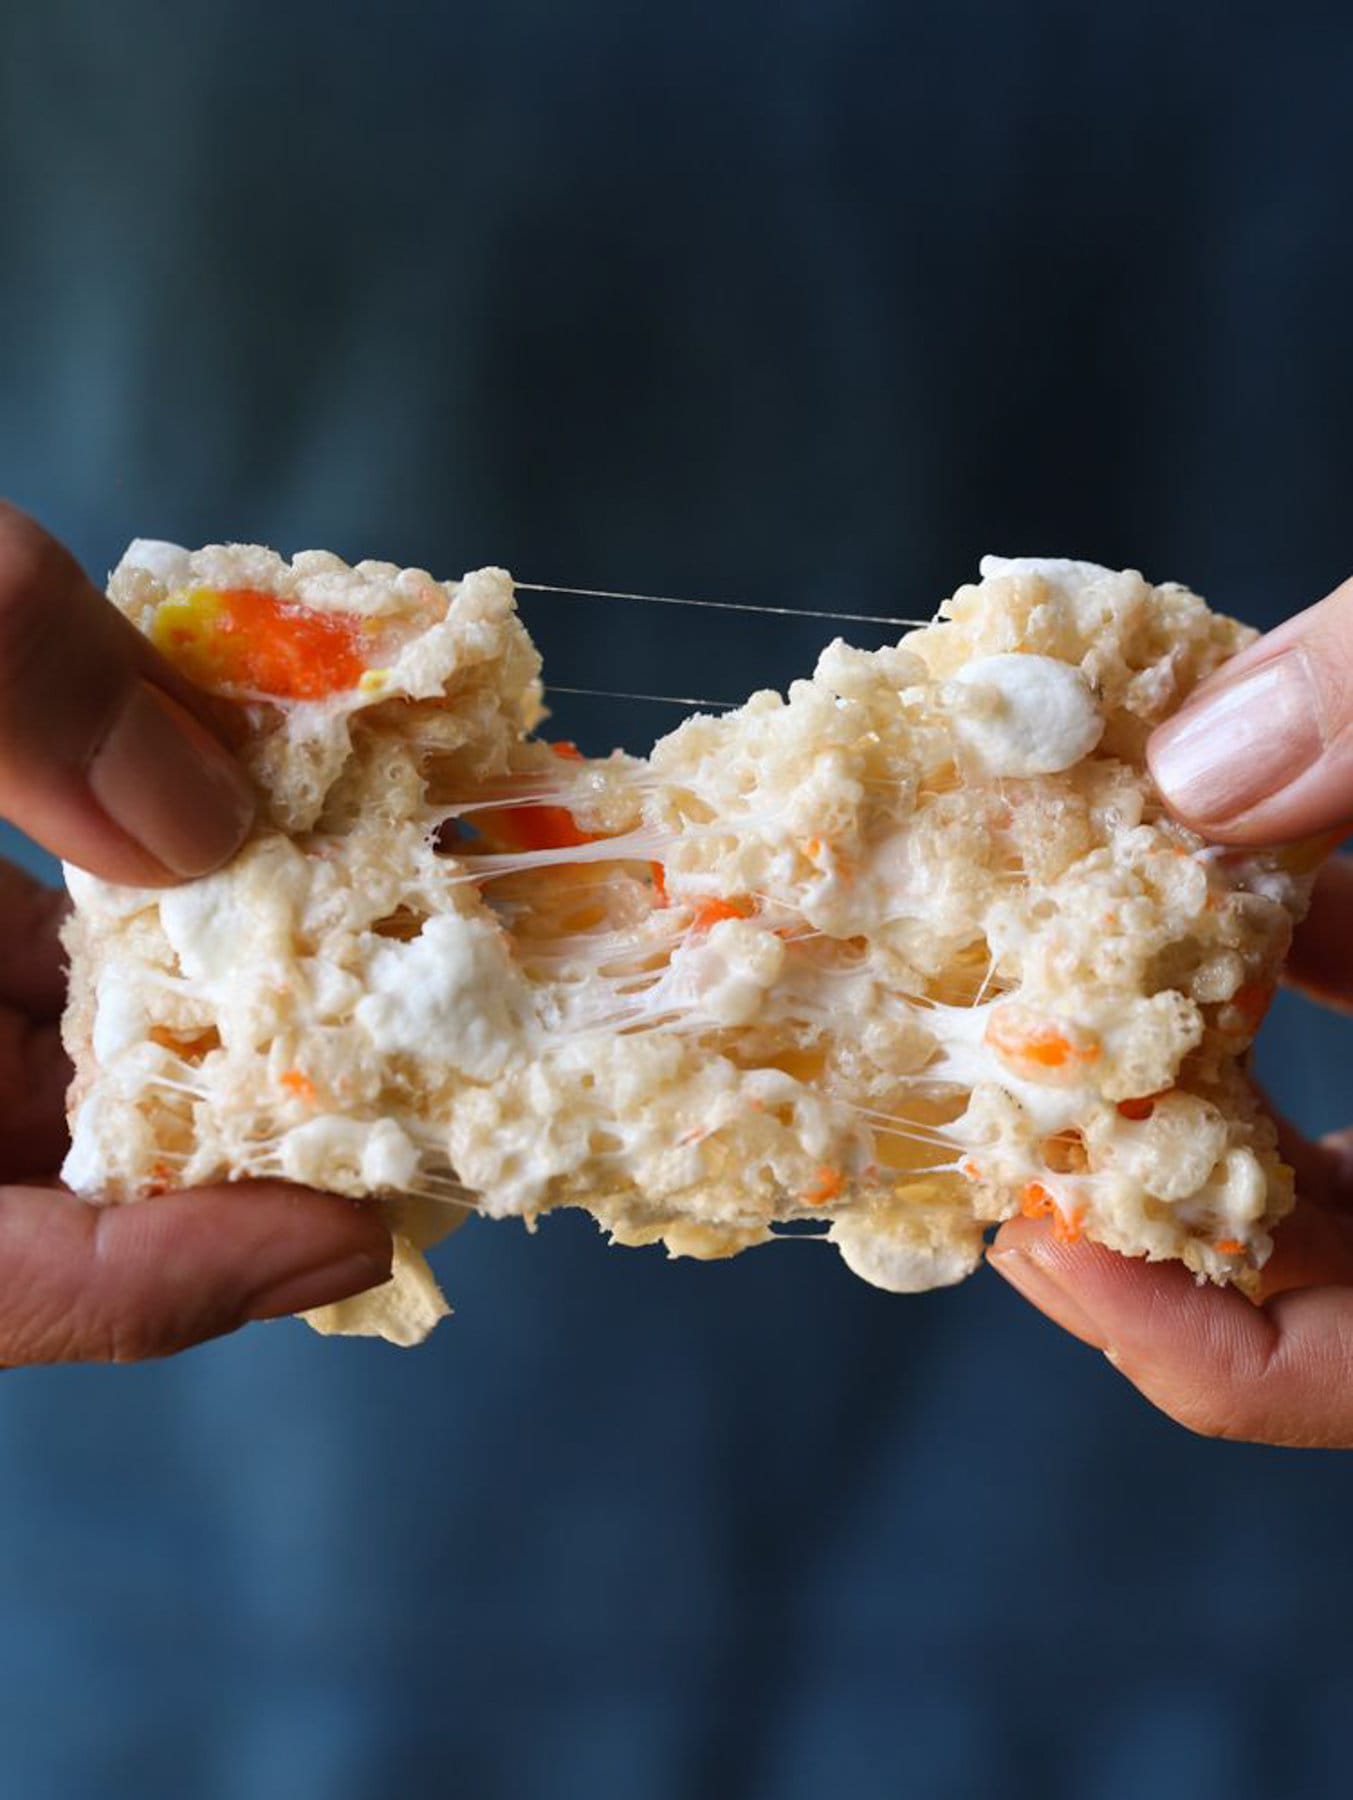 Candy Corn Rice Krispie Treats Pulled apart and ready to eat